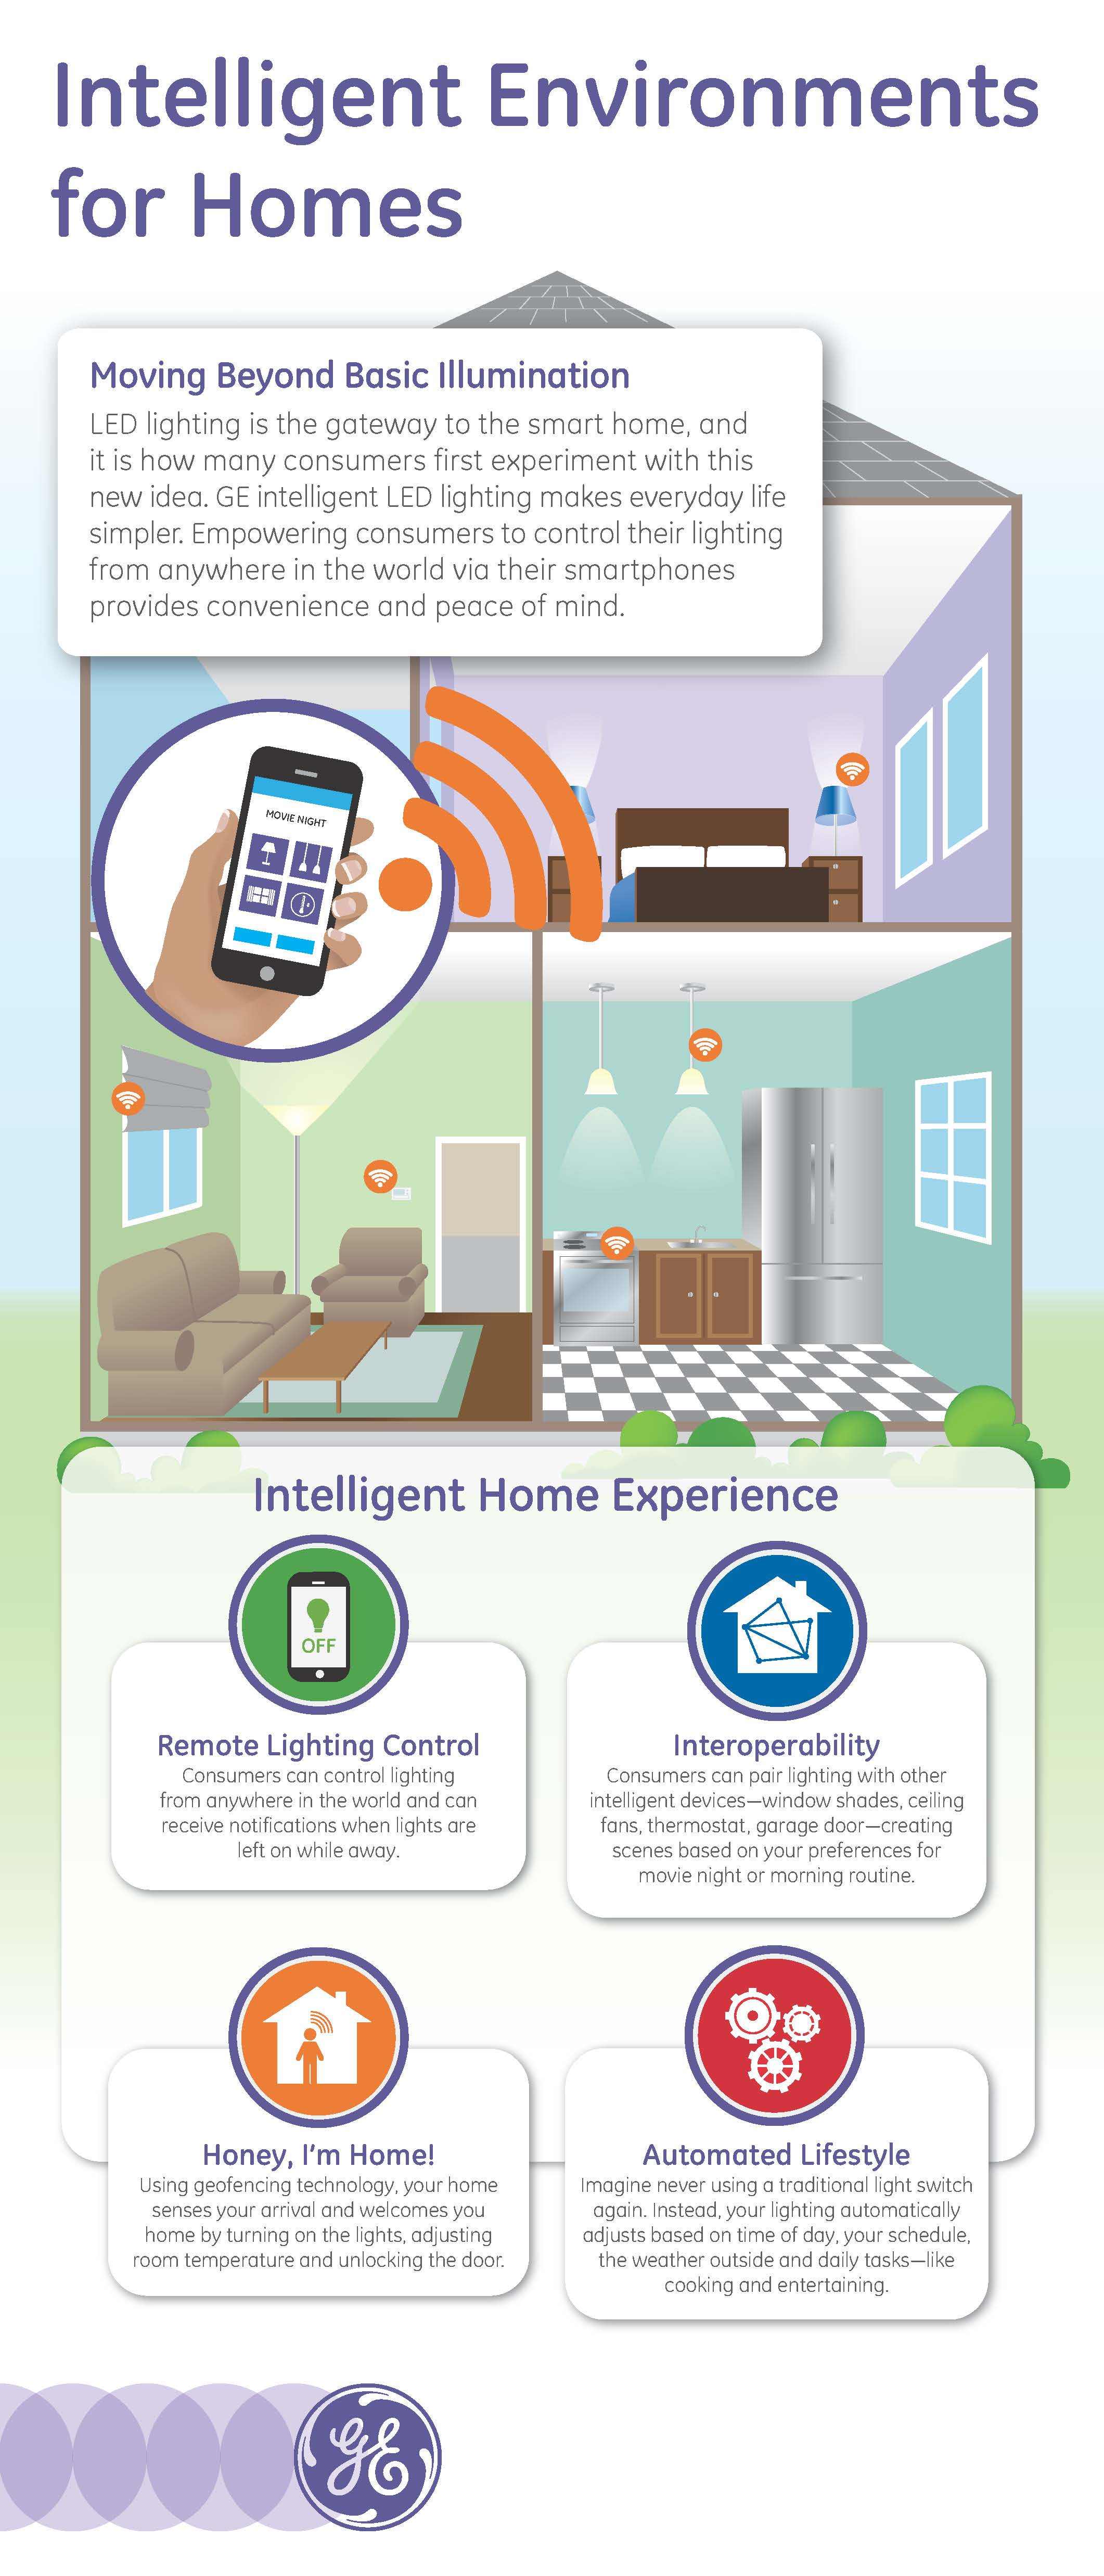 Smart Home Scenarios: Control Lights When I'm Out